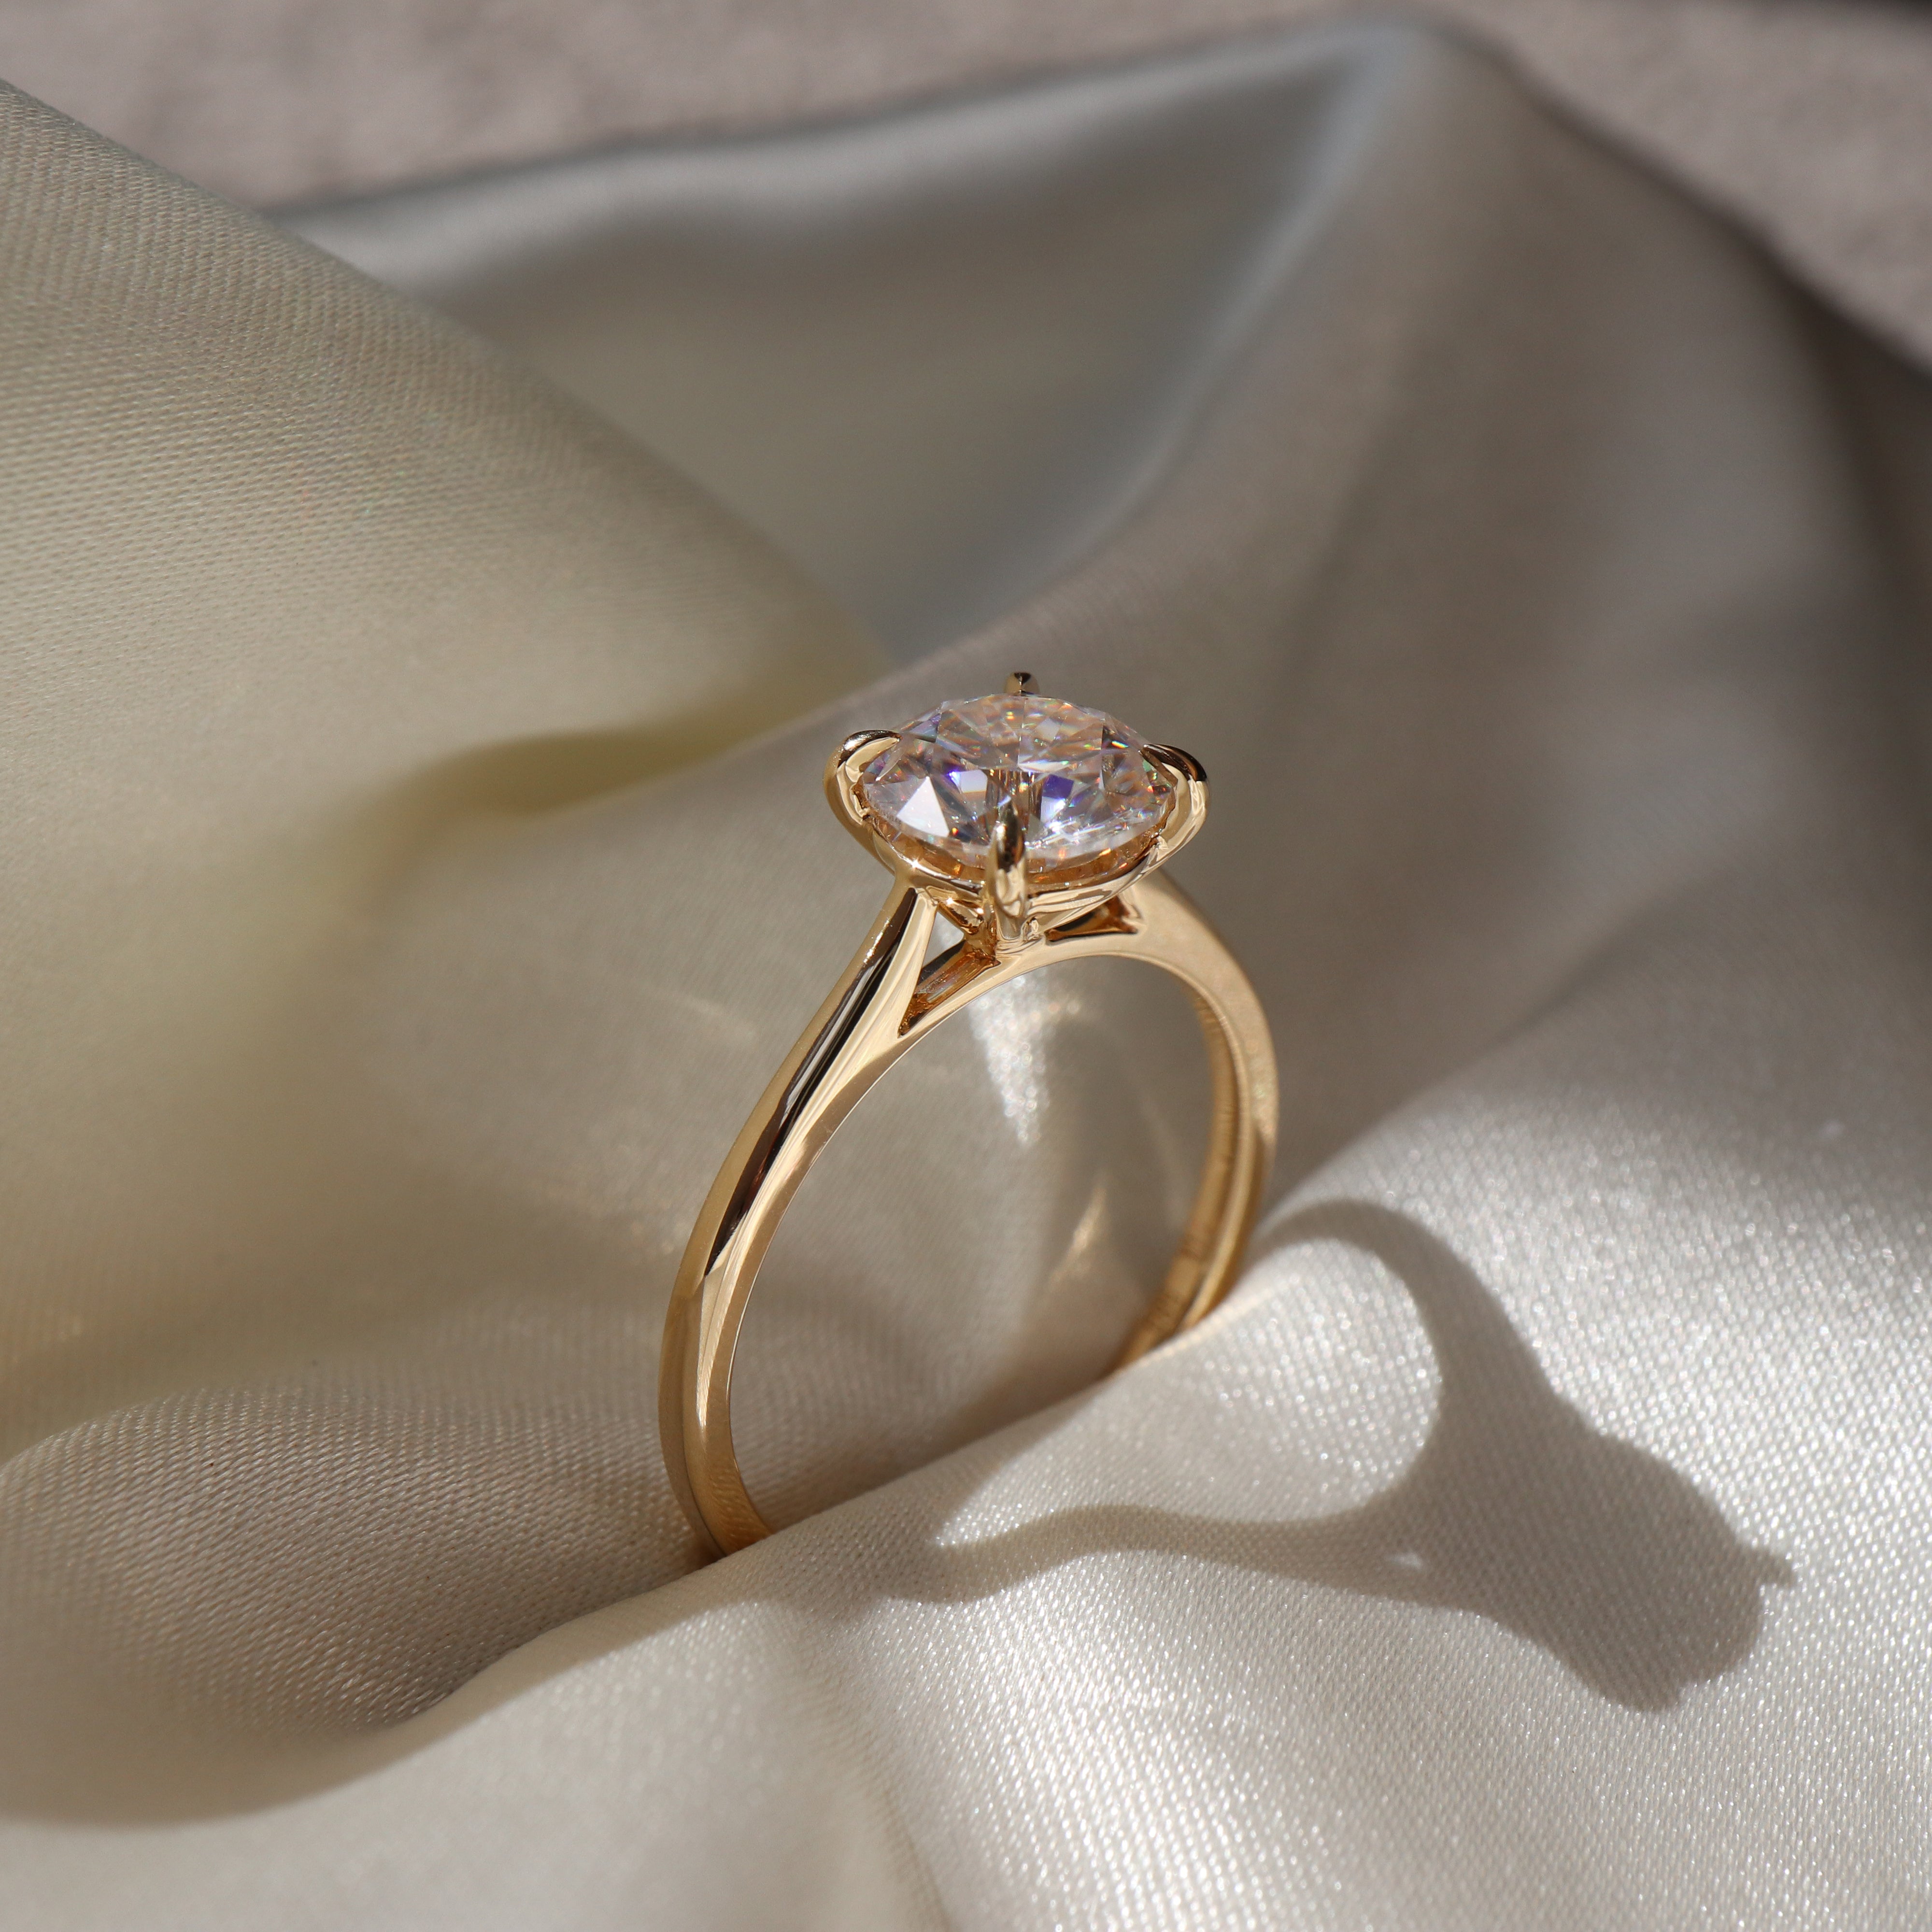 The Isla Ring - Round Cathedral Solitaire